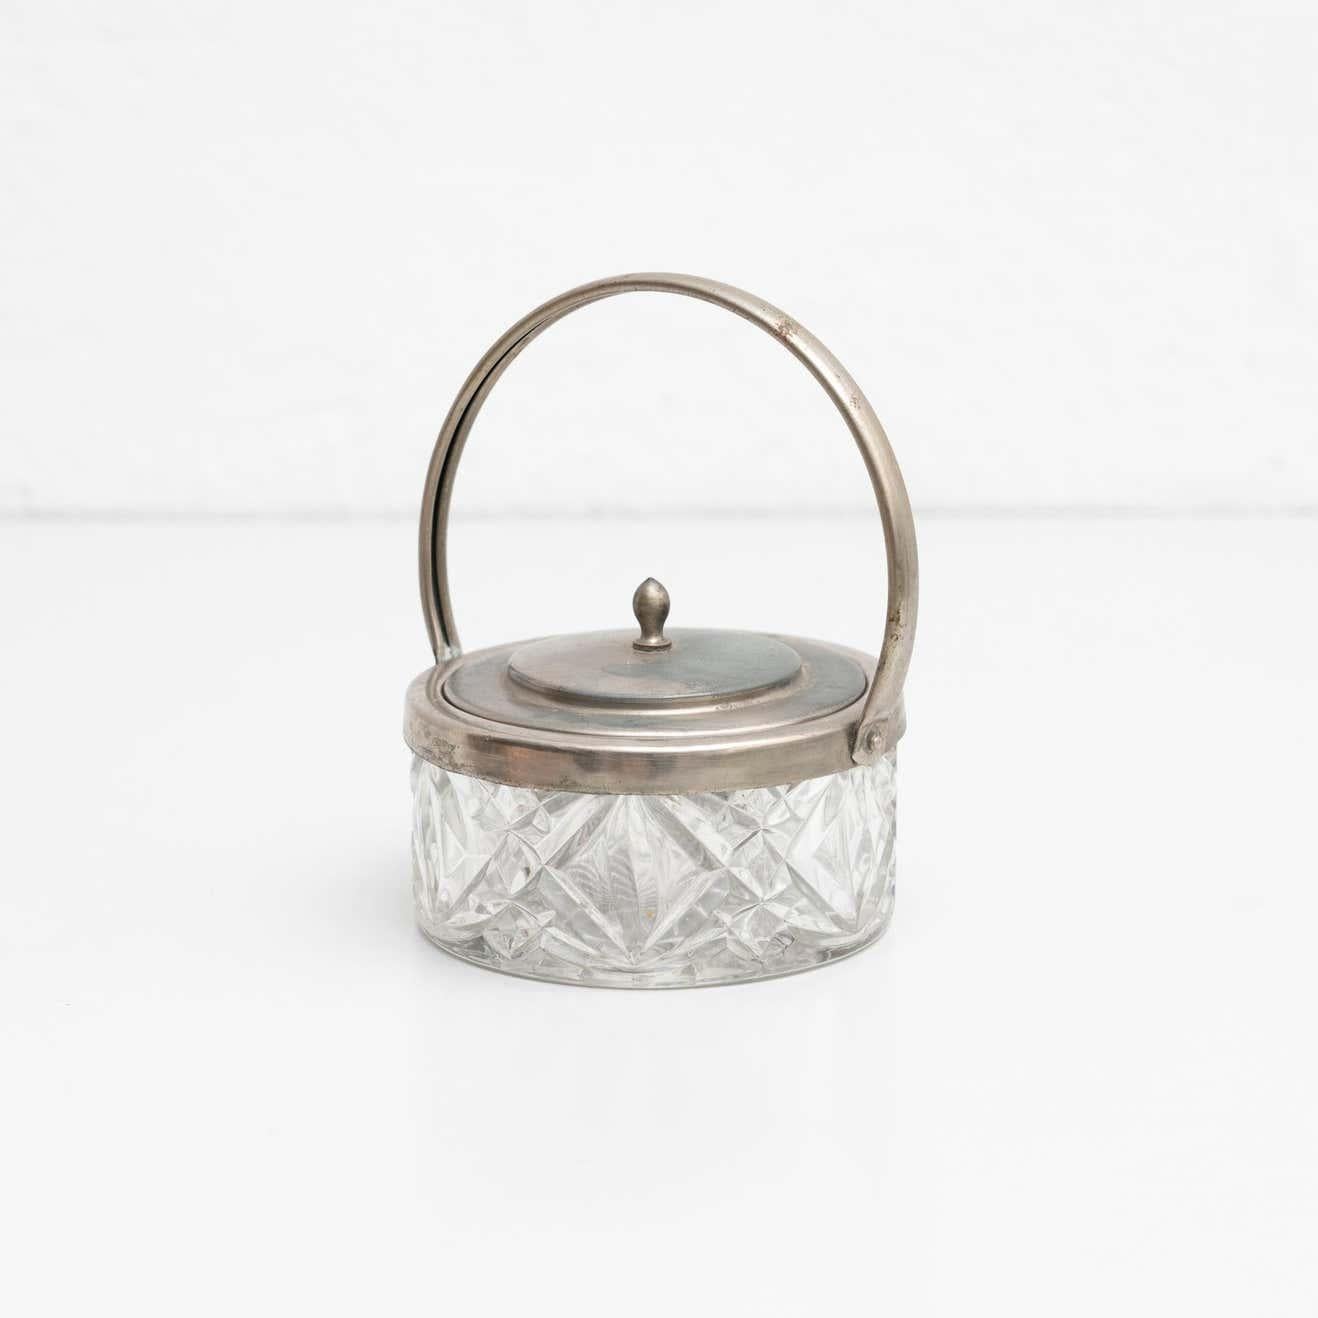 Antique victorian style Spanish glass and silver lidded sugar pot with a swing handle and a pull off lid.

Made by unknown manufacturer, Spain, early 20th century.

In original condition, with minor wear consistent with age and use, preserving a